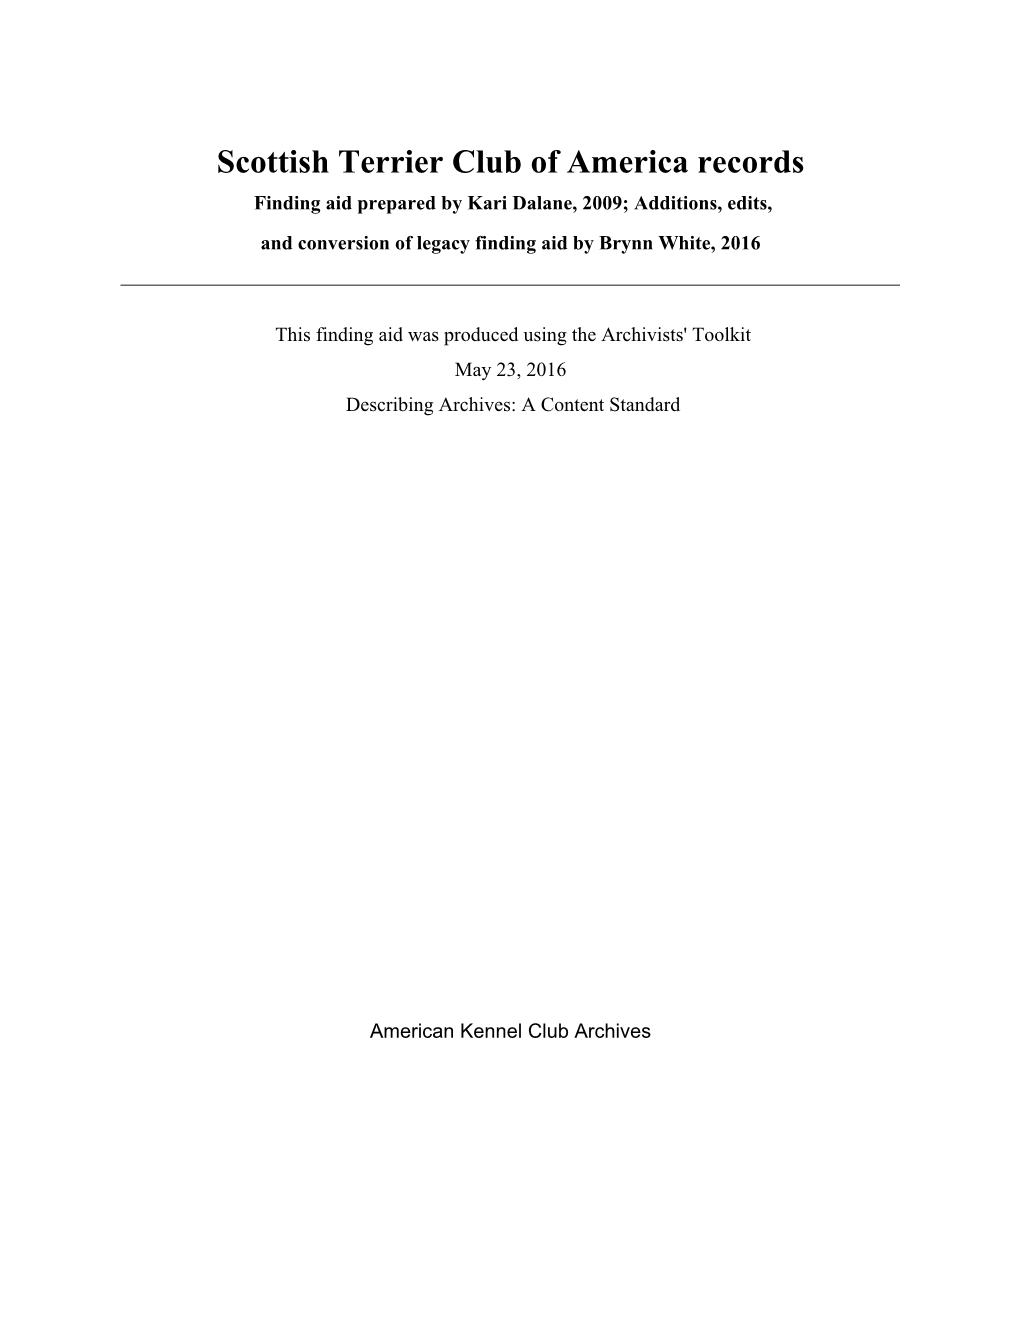 Scottish Terrier Club of America Records Finding Aid Prepared by Kari Dalane, 2009; Additions, Edits, and Conversion of Legacy Finding Aid by Brynn White, 2016